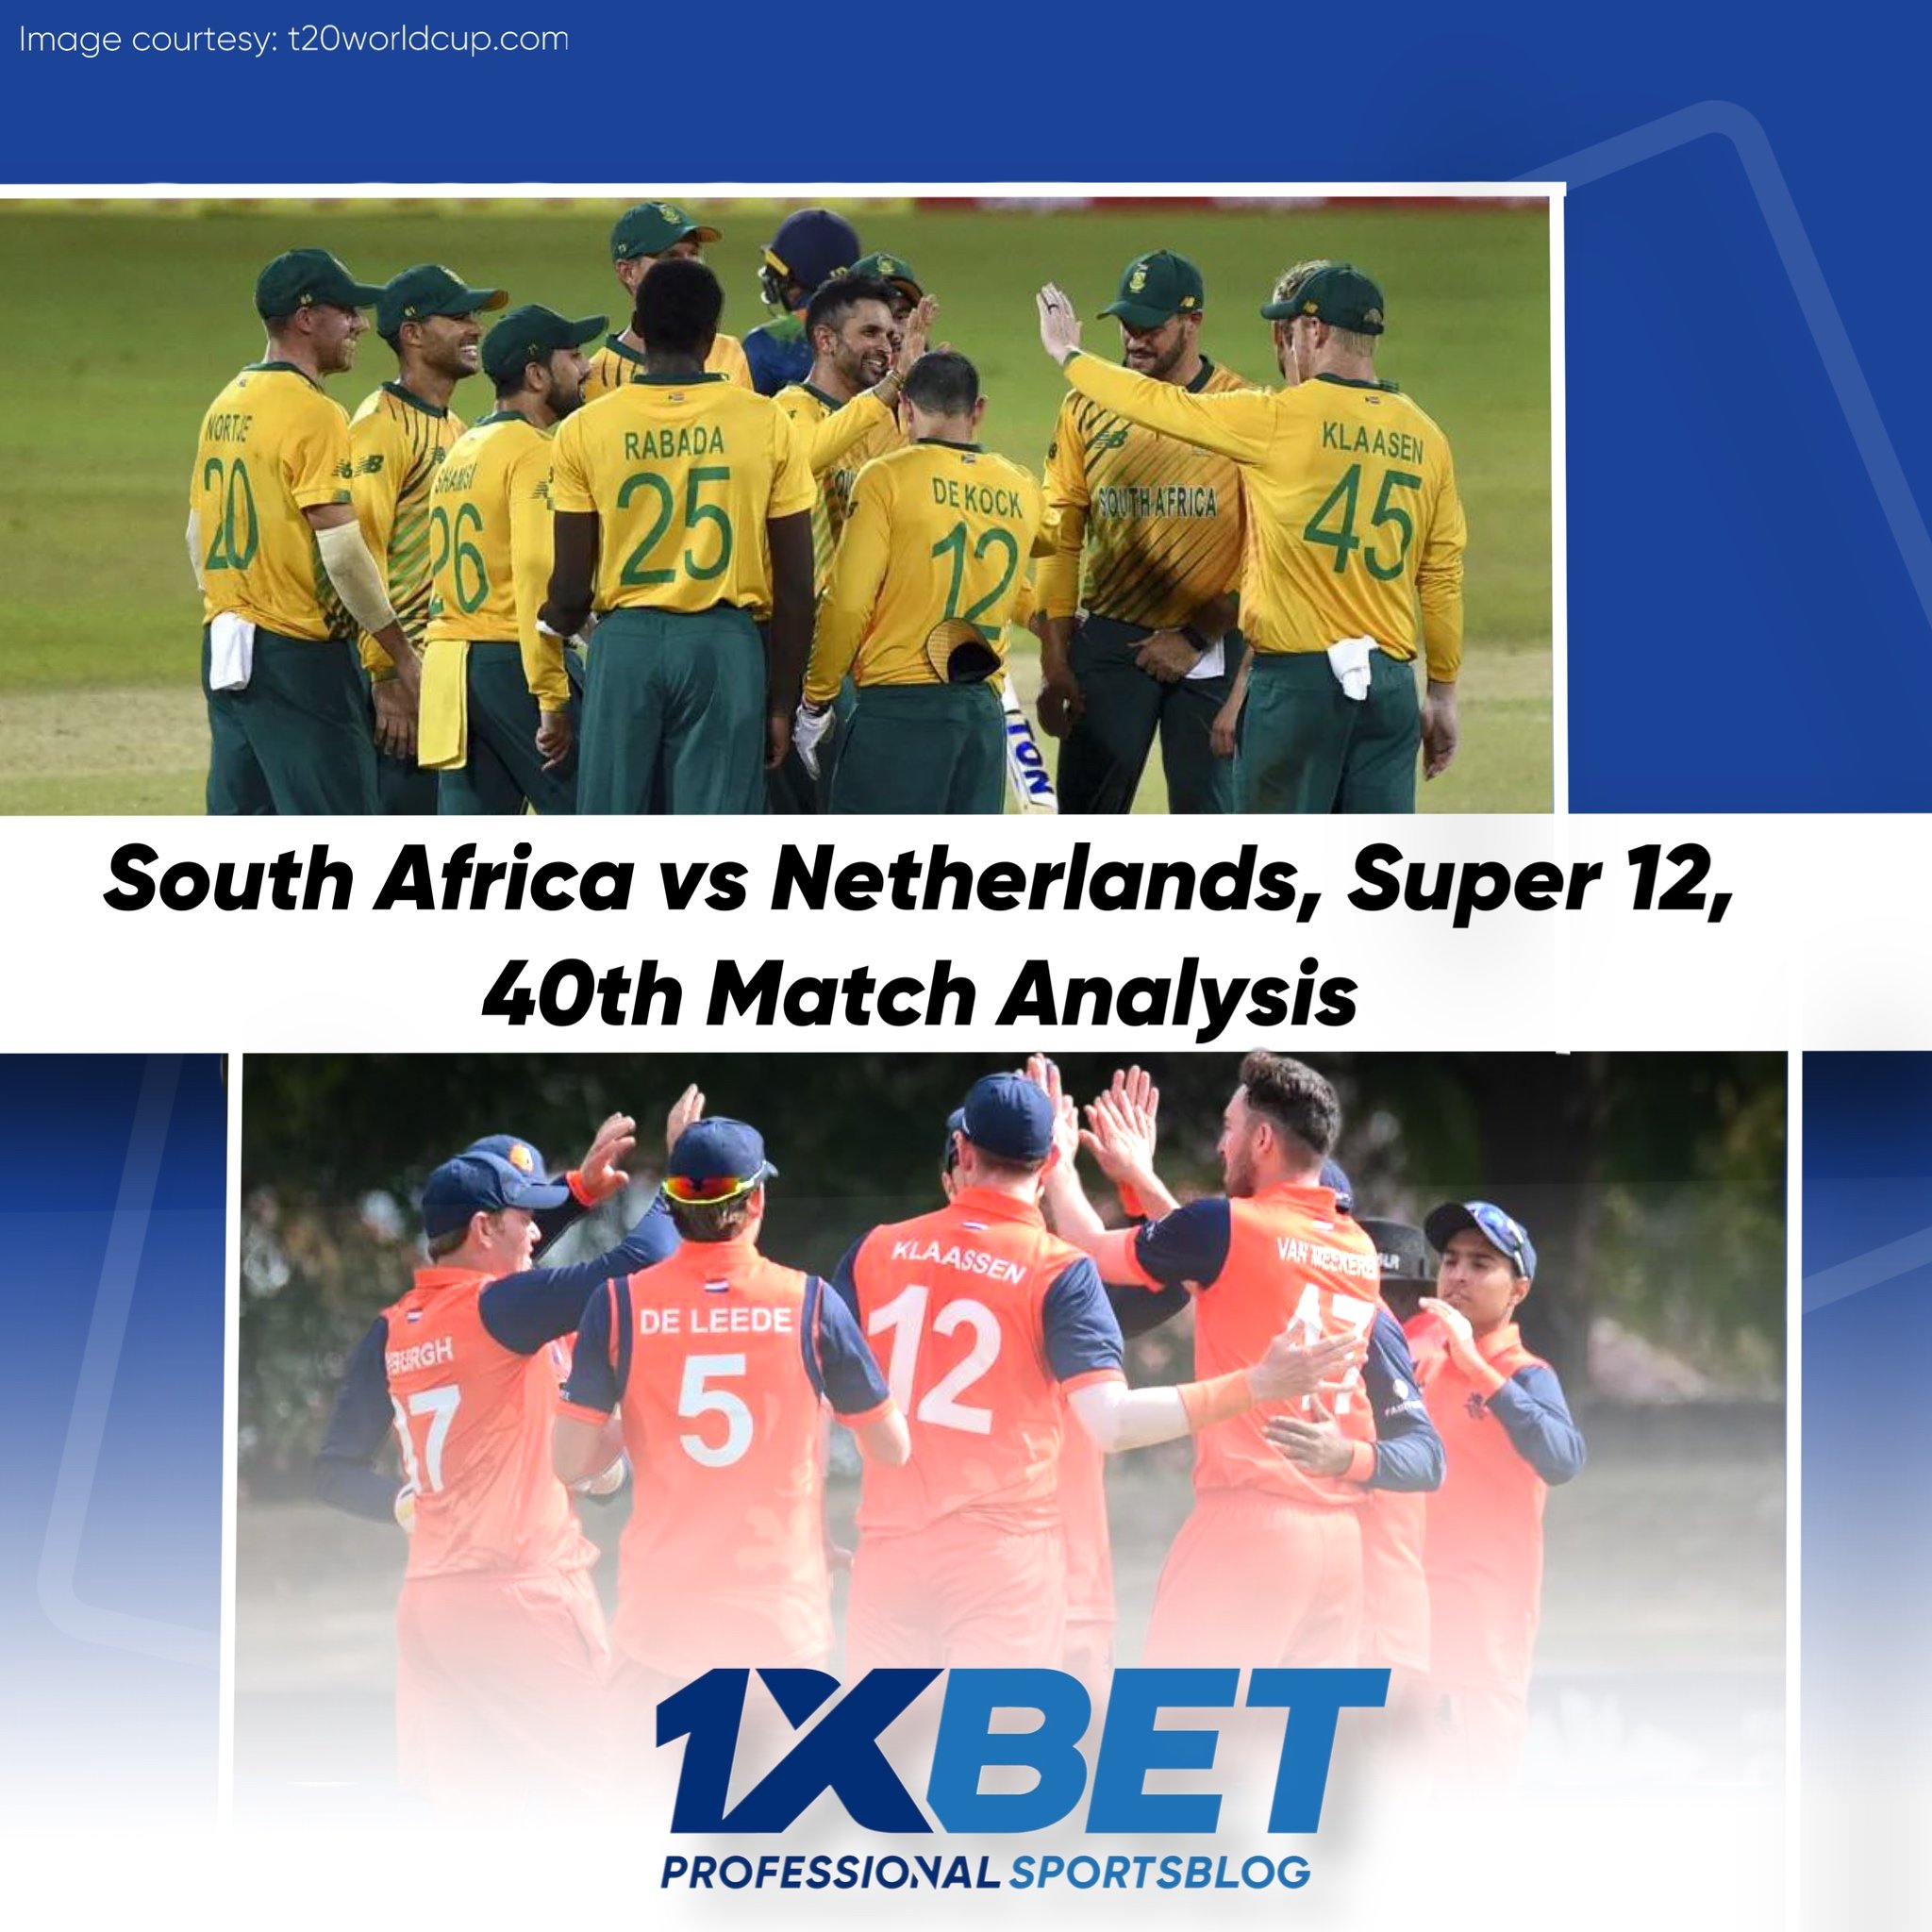 South Africa vs Netherlands, Super 12, 40th Match Analysis